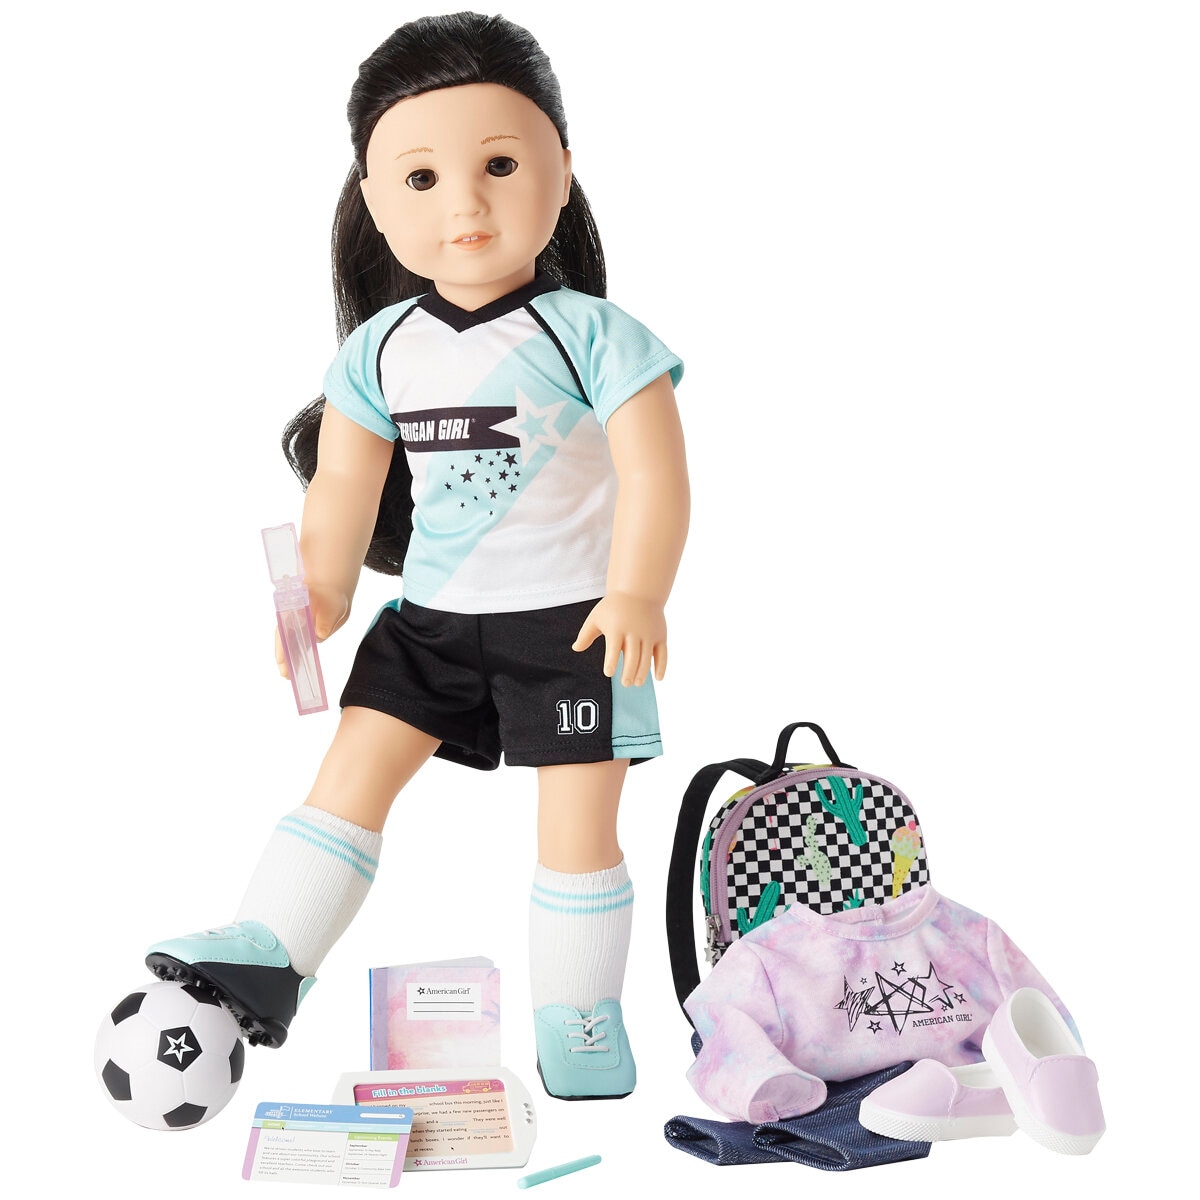 American Girl Truly Me School Day to Soccer Play Doll 84